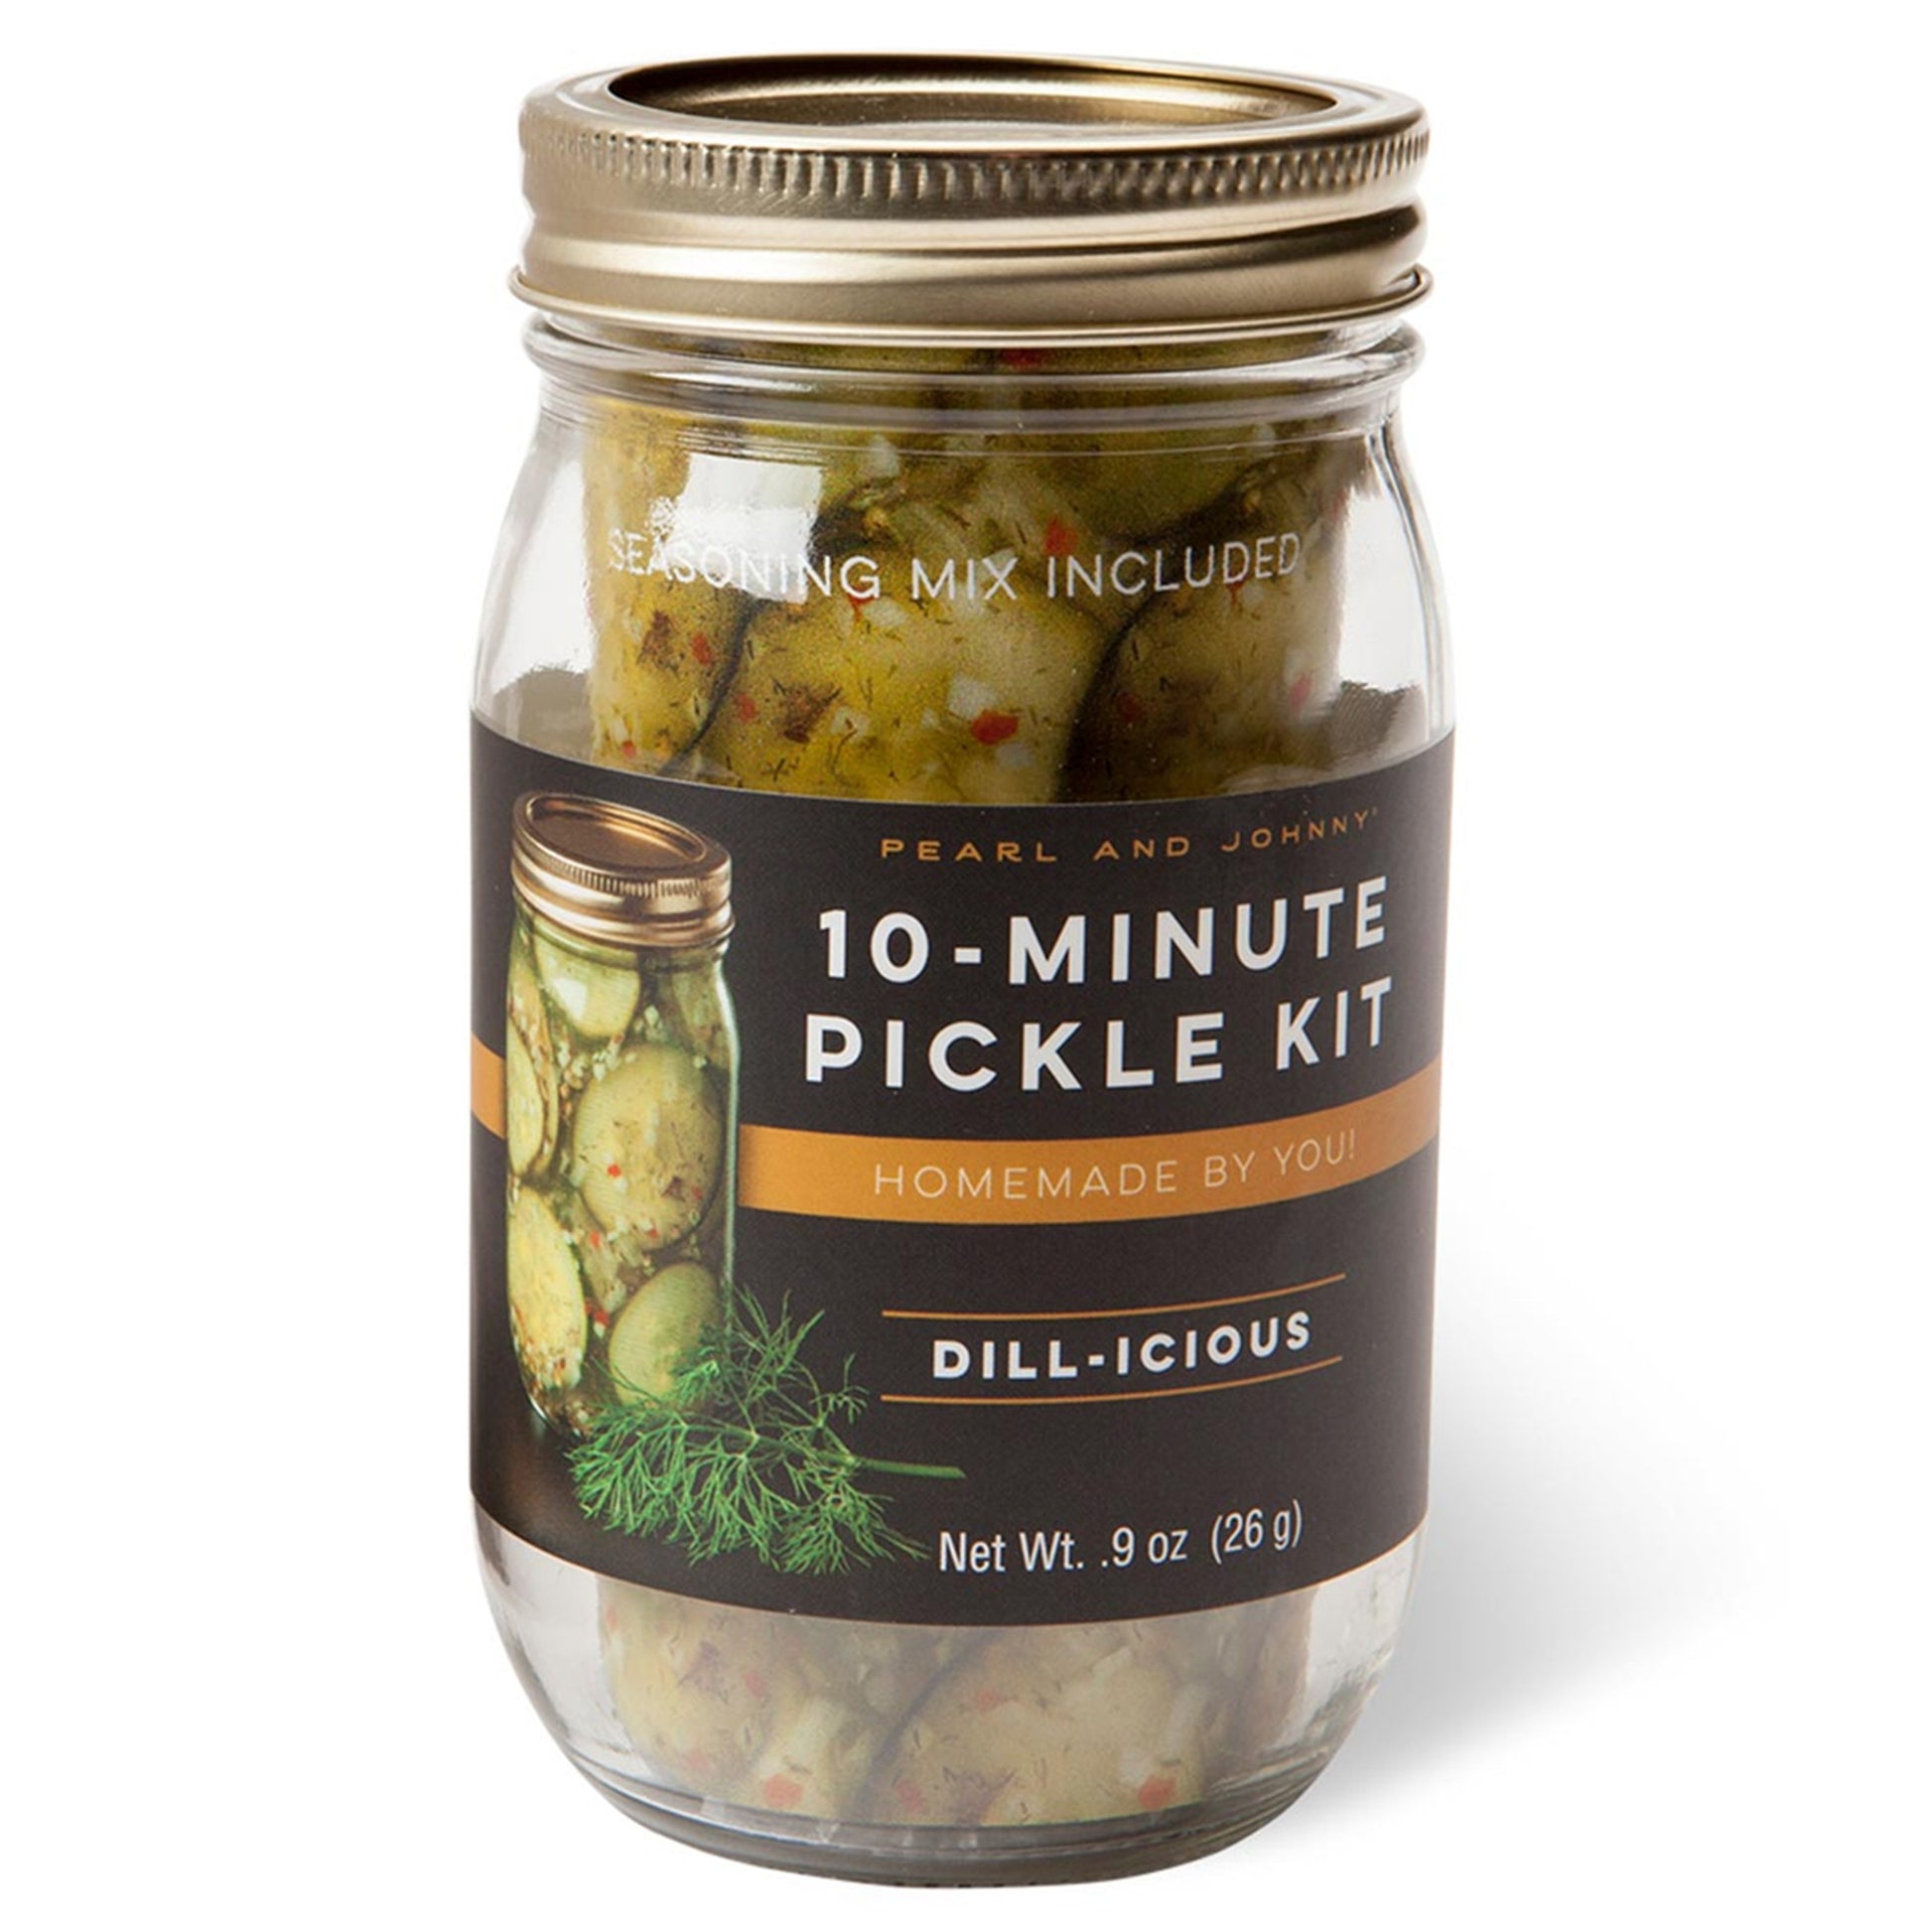 Dill-icious-10-Minute Pickle Kit